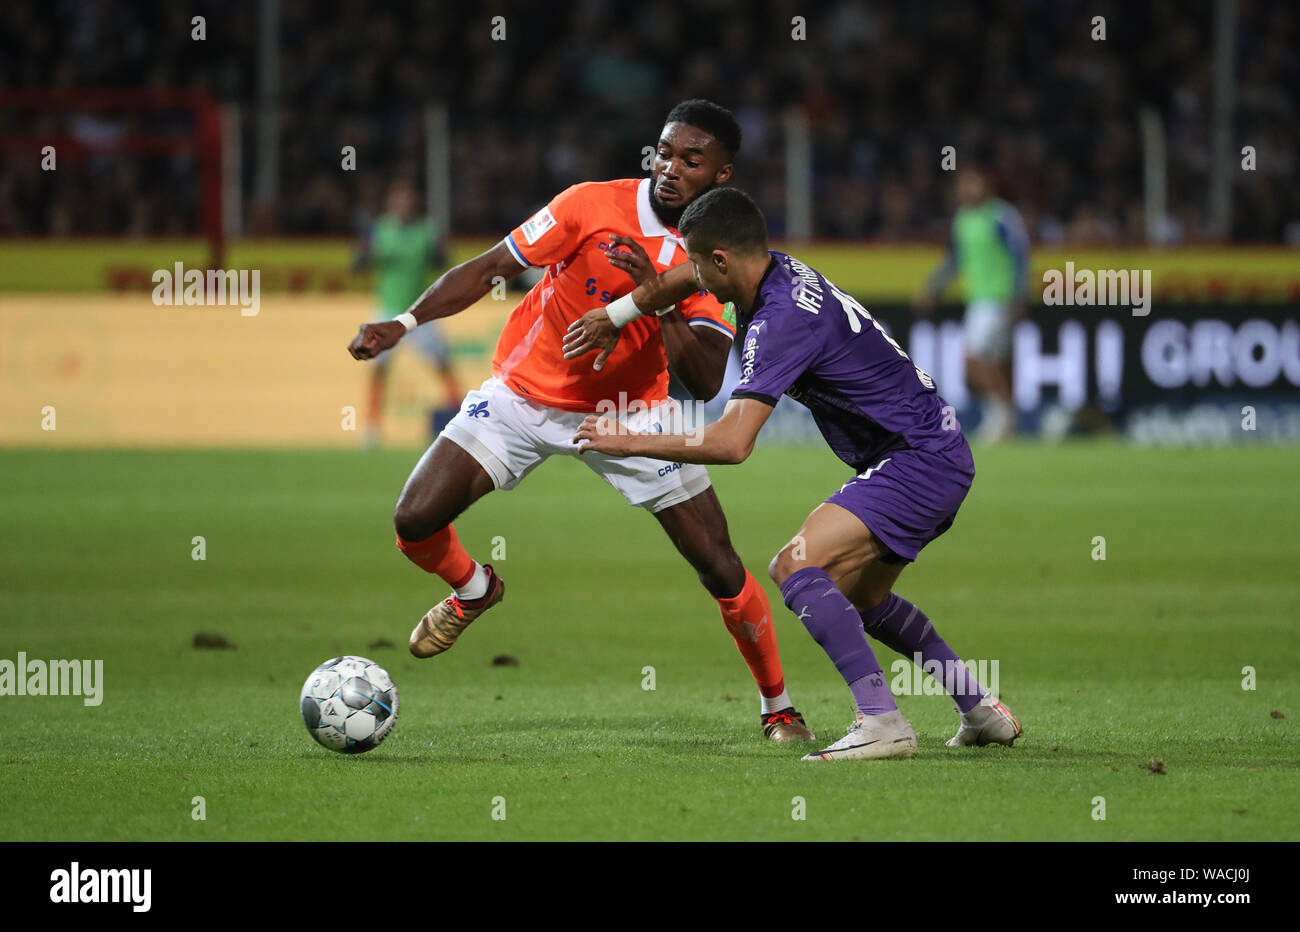 19 August 2019, Lower Saxony, Osnabrück: Soccer: 2nd Bundesliga, VfL Osnabrück - Darmstadt 98, 3rd matchday in the stadium at the Bremer Brücke. Osnabrück's Anas Quahim (r) in the fight for the ball with Mandela Egbo (l) from Darmstadt. Photo: Friso Gentsch/dpa - IMPORTANT NOTE: In accordance with the requirements of the DFL Deutsche Fußball Liga or the DFB Deutscher Fußball-Bund, it is prohibited to use or have used photographs taken in the stadium and/or the match in the form of sequence images and/or video-like photo sequences. Stock Photo